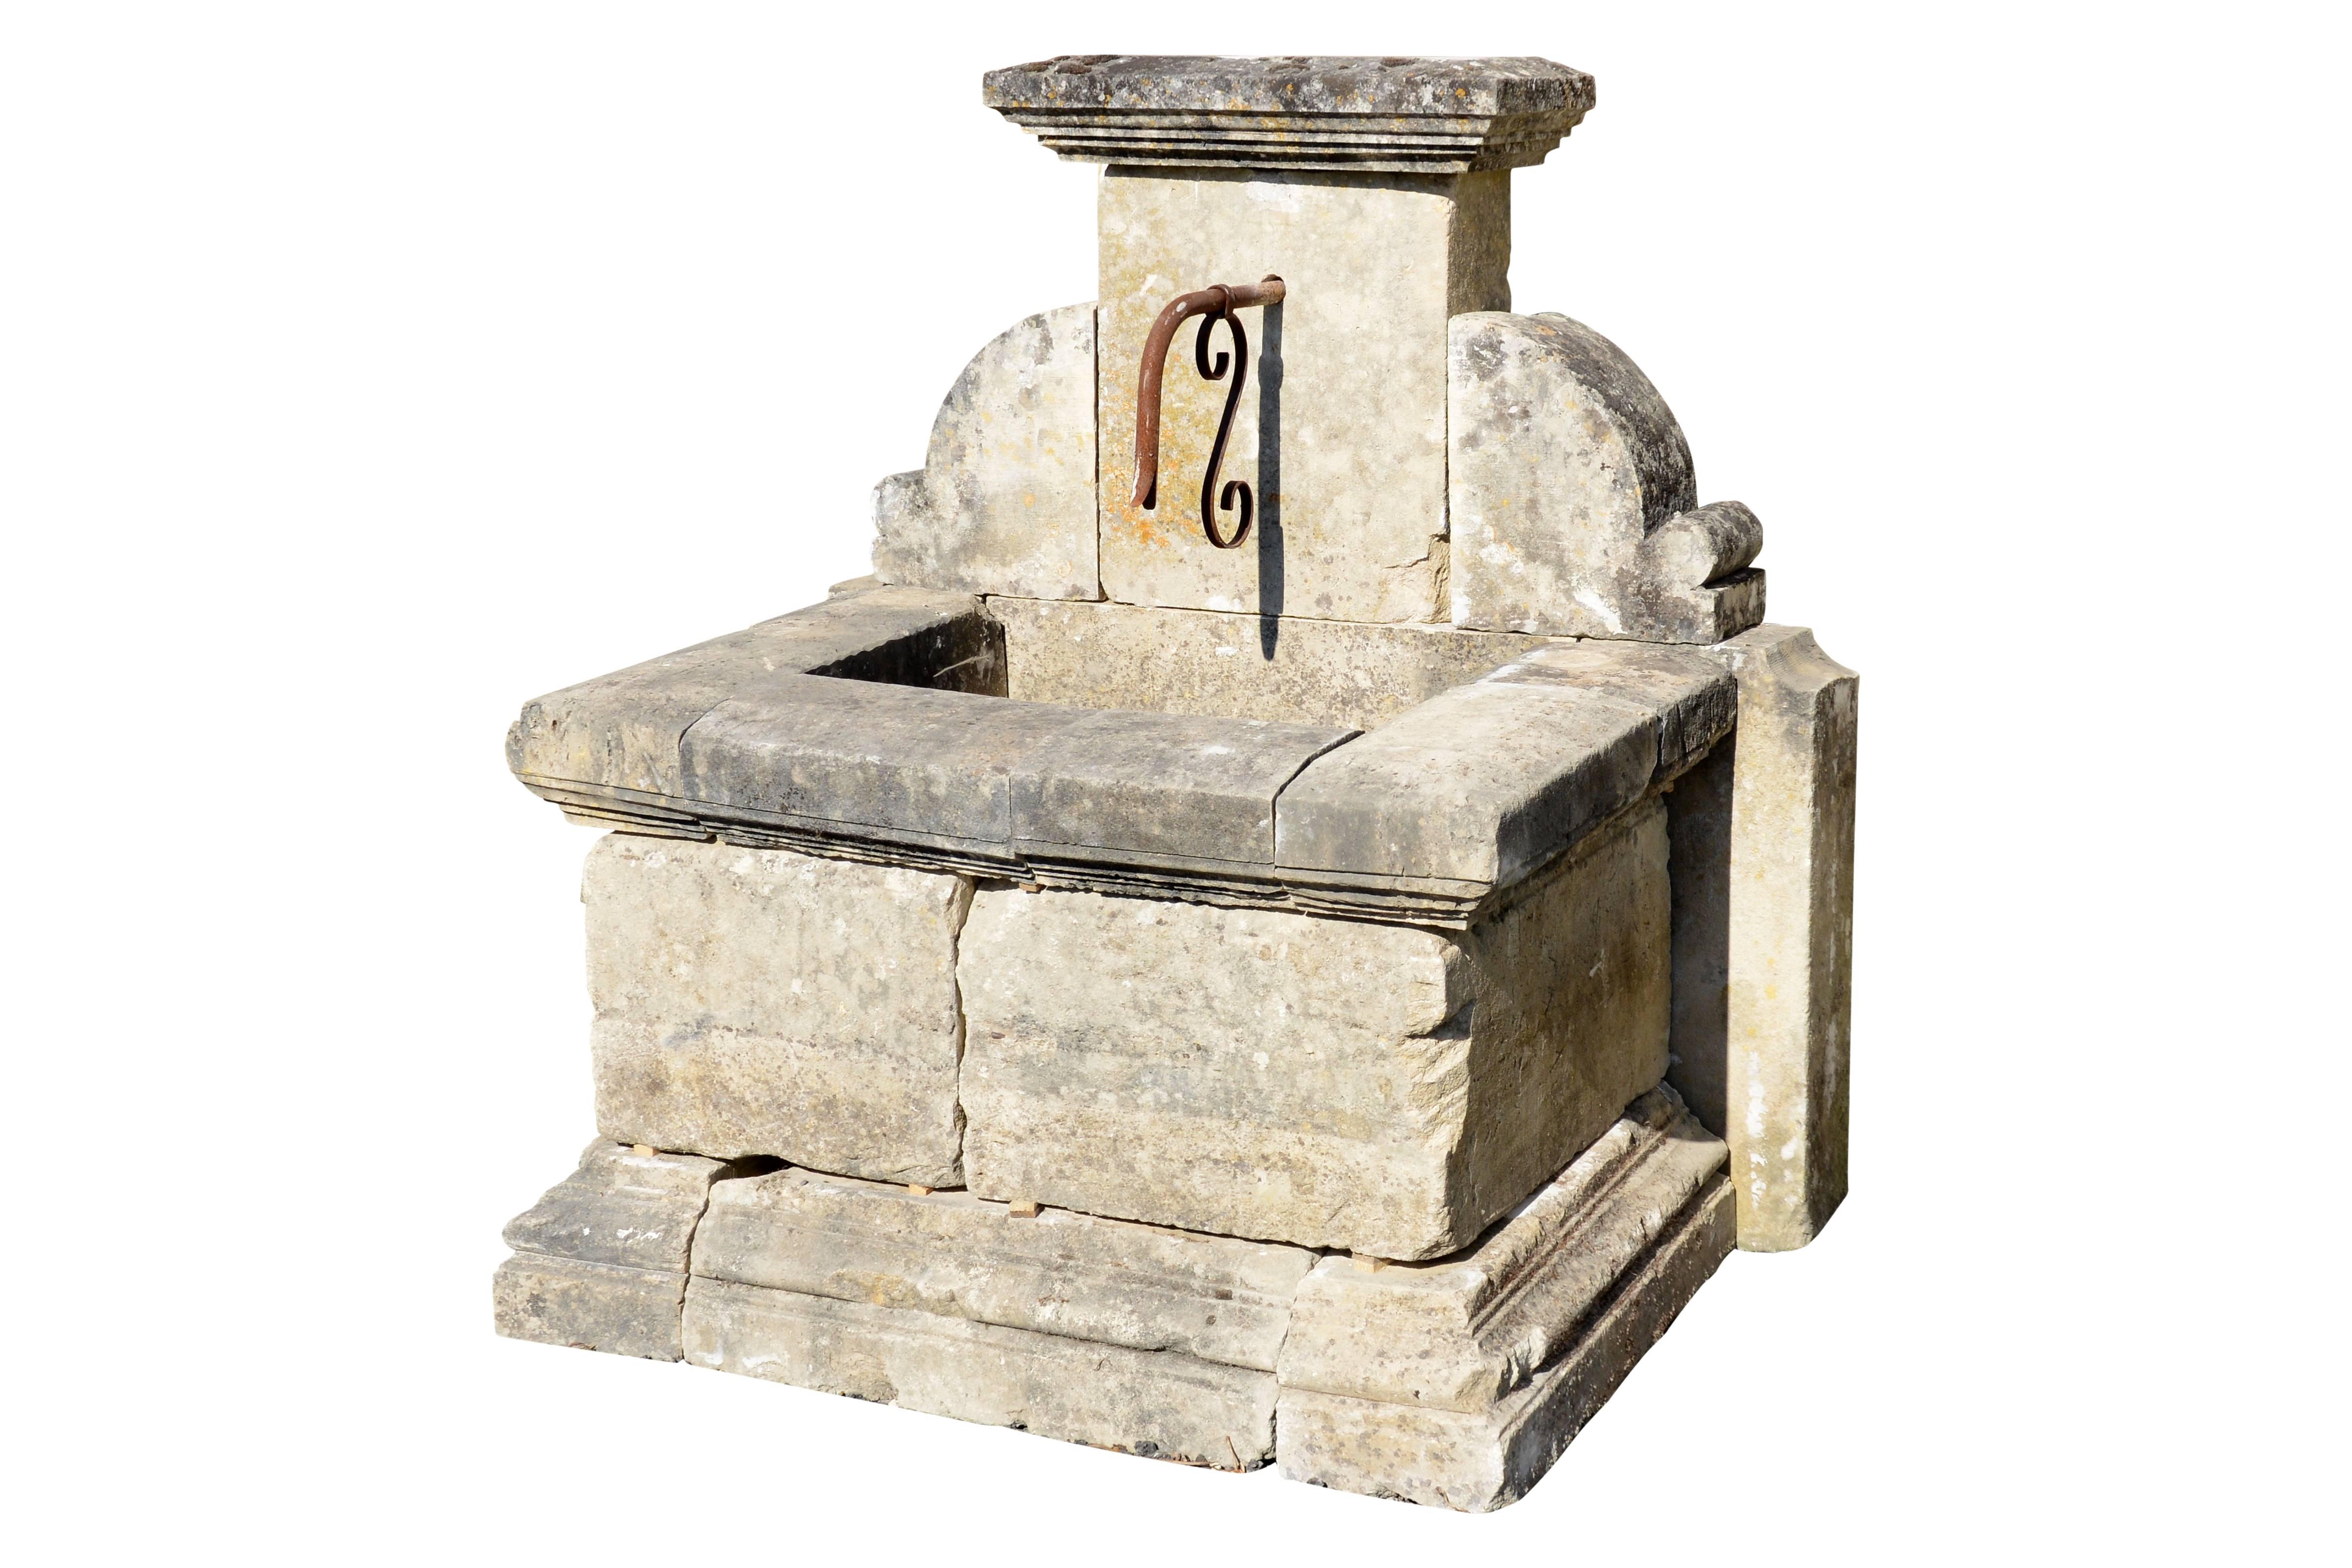 Composition of antique 19th century period reclaimed architectural elements forming a Provençal style wall fountain. The pediment, in the form of pilaster, topped by a degrees cornice, is flanked by molded ailerons on the sides. The centre is